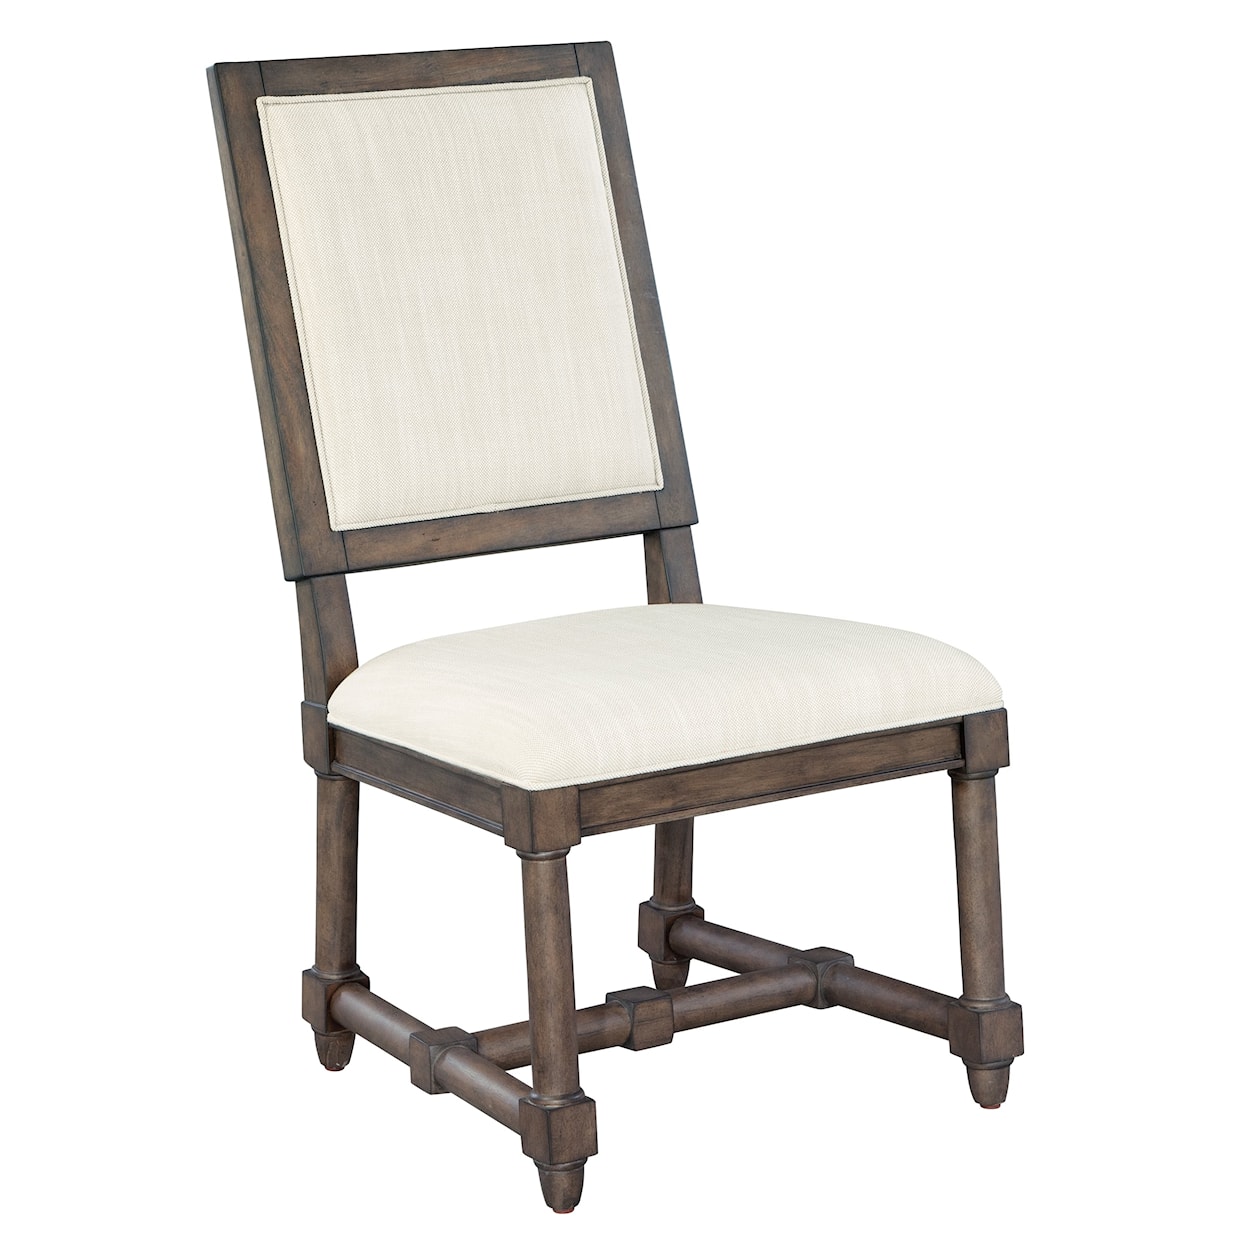 Hekman Lincoln Park Upholstered Dining Side Chair